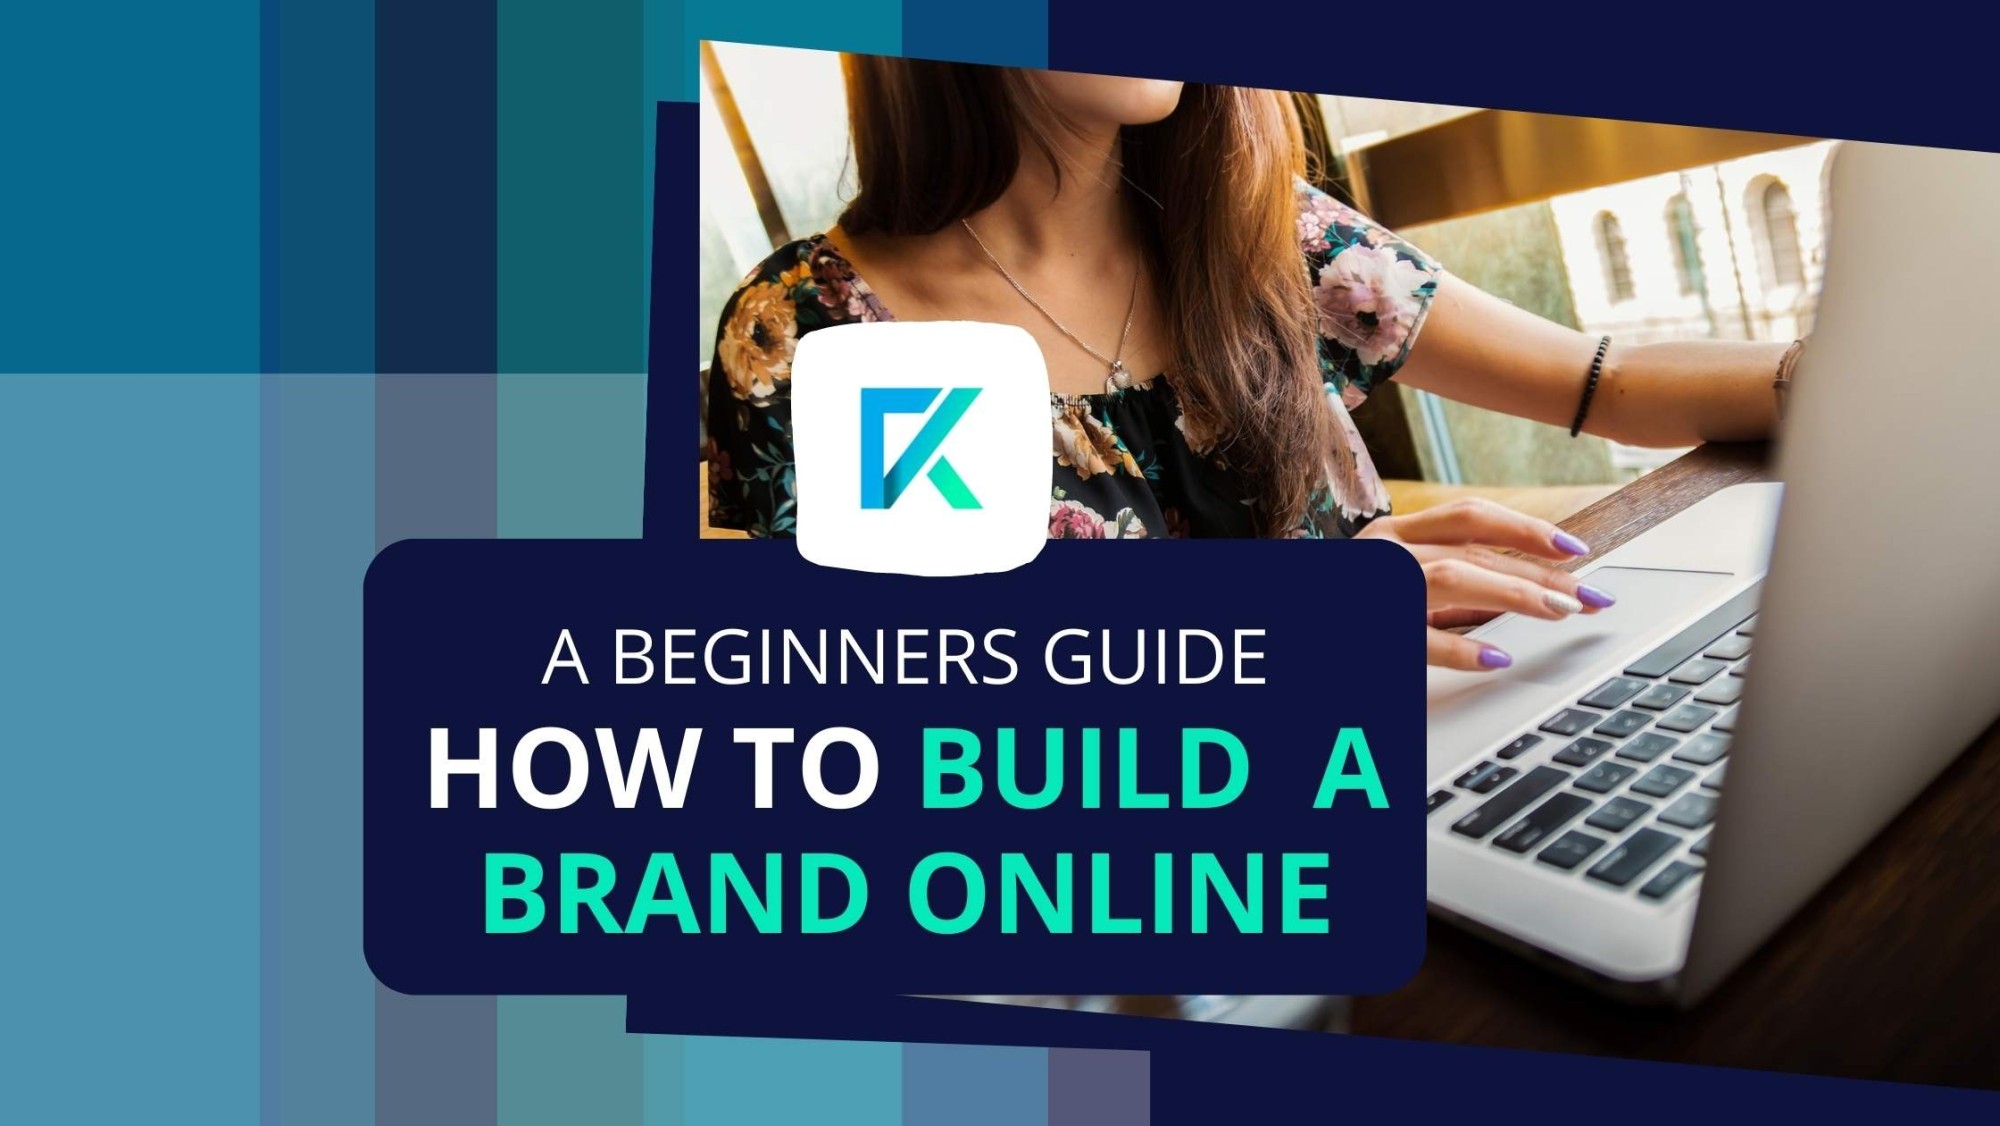 How to Build a Brand Online - A guide for beginners